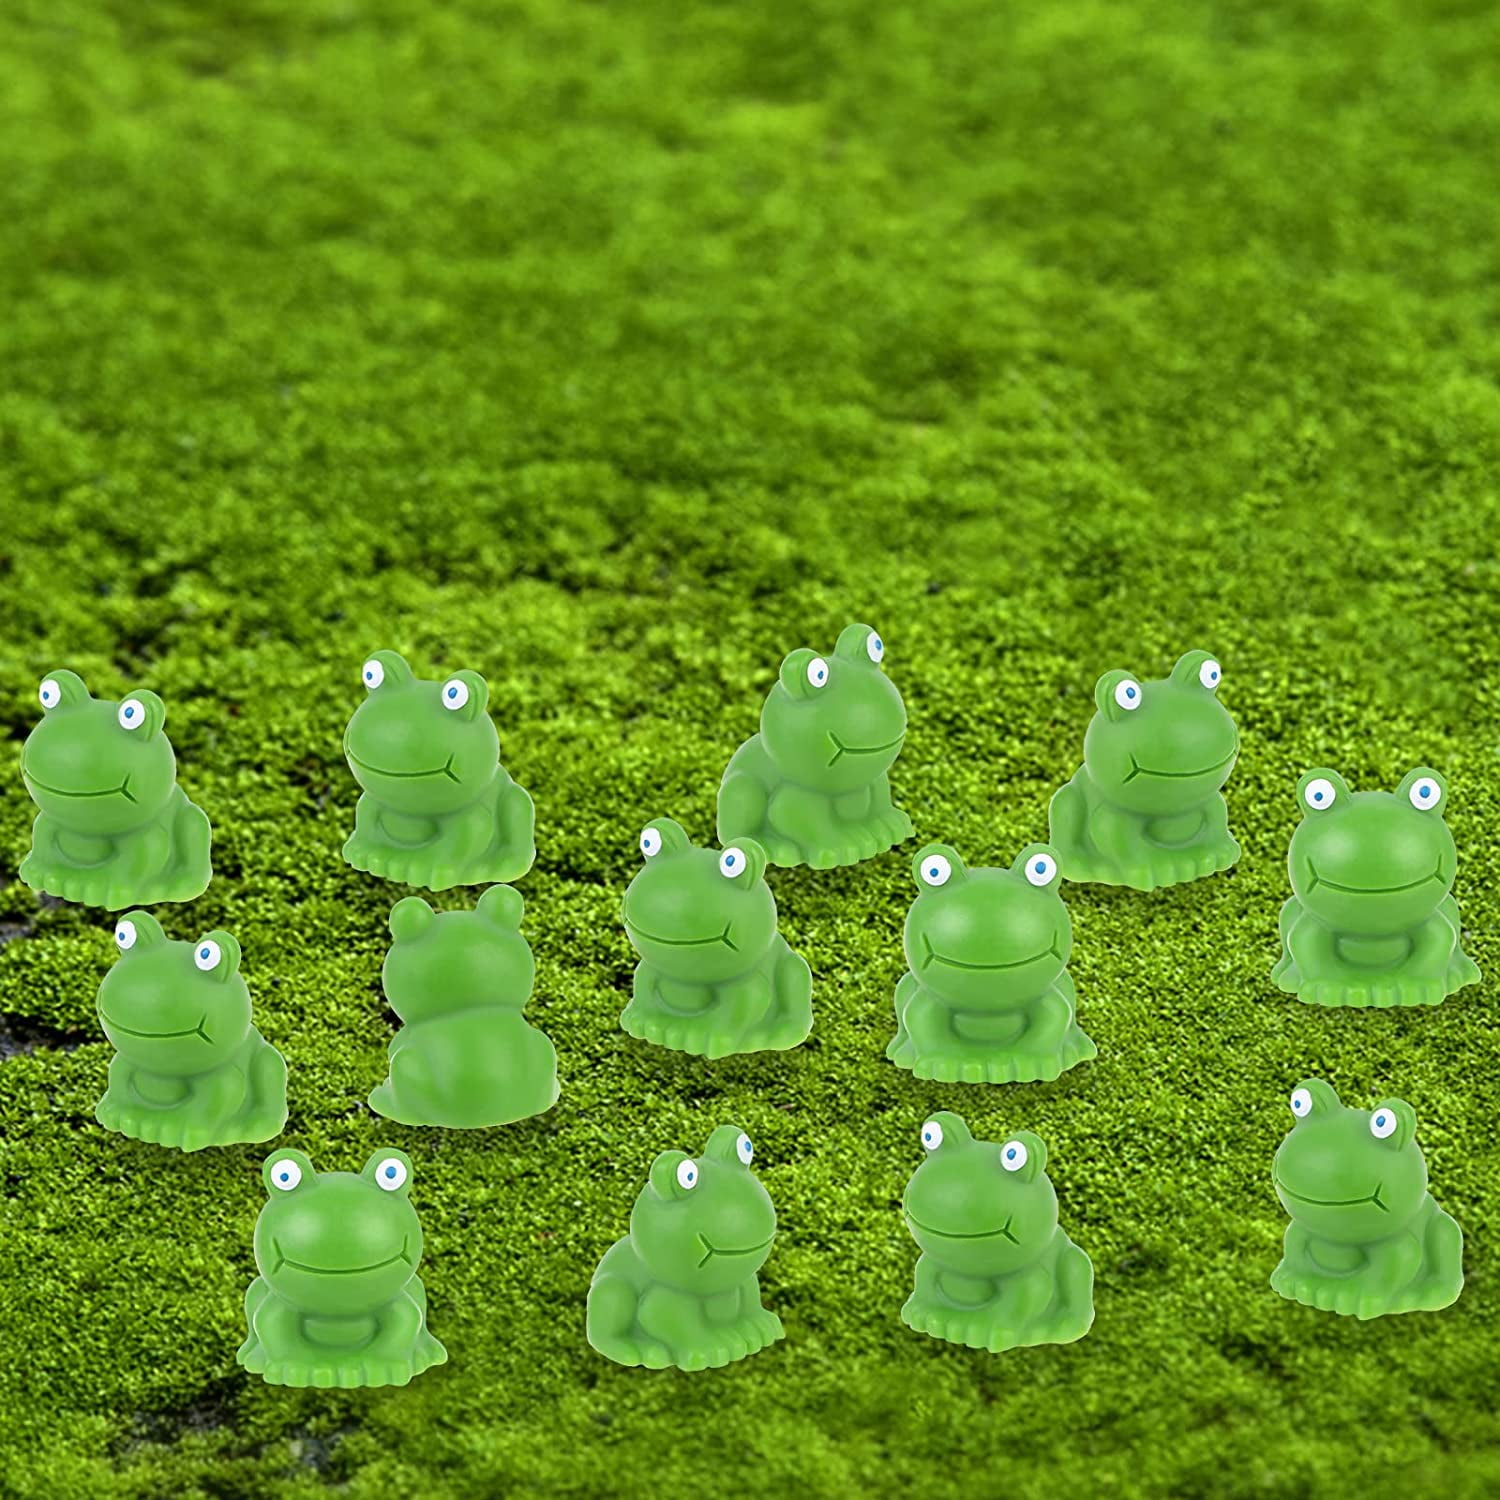  TTEDMO Mini Frogs 200 Pack,Tiny Frogs 200 Pack,Mini Resin Frogs, Mini Resin Frogs Bulk,Miniature Resin Mini Frogs Green Frog (Pink,200 PCS)  : Patio, Lawn & Garden